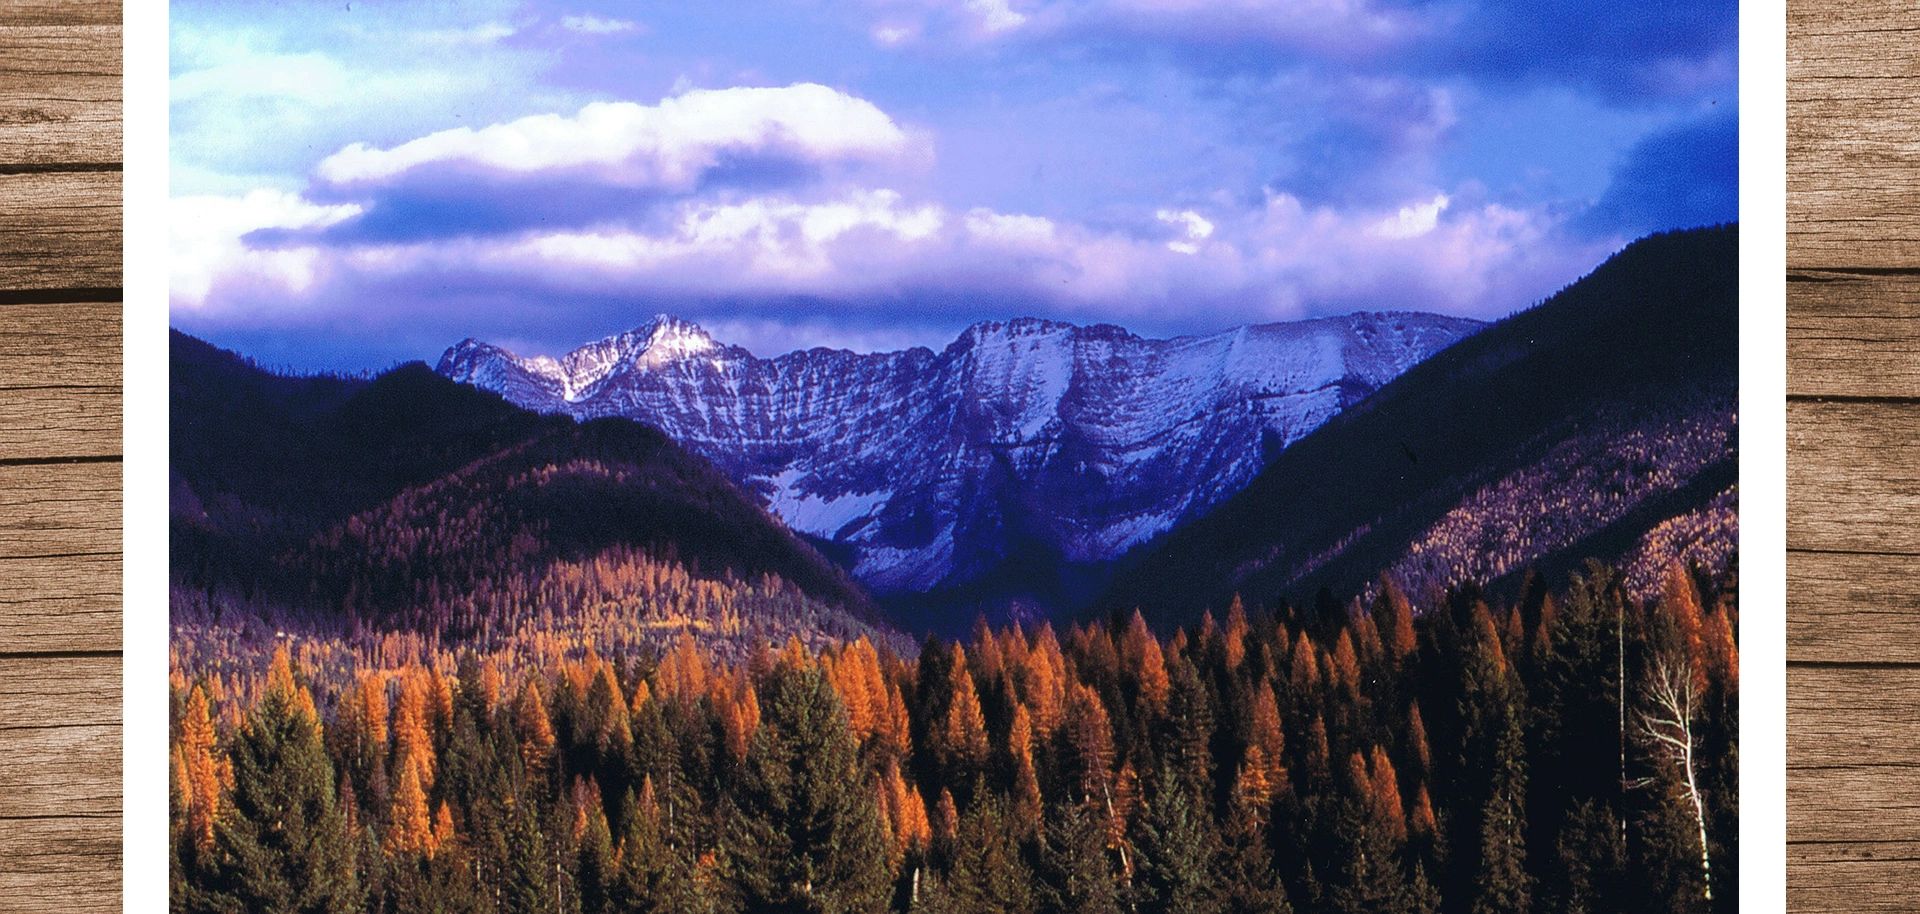 Image of Swan Peak, Swan Valley, Montana. Snow capped mountain view with larch trees in foreground. 